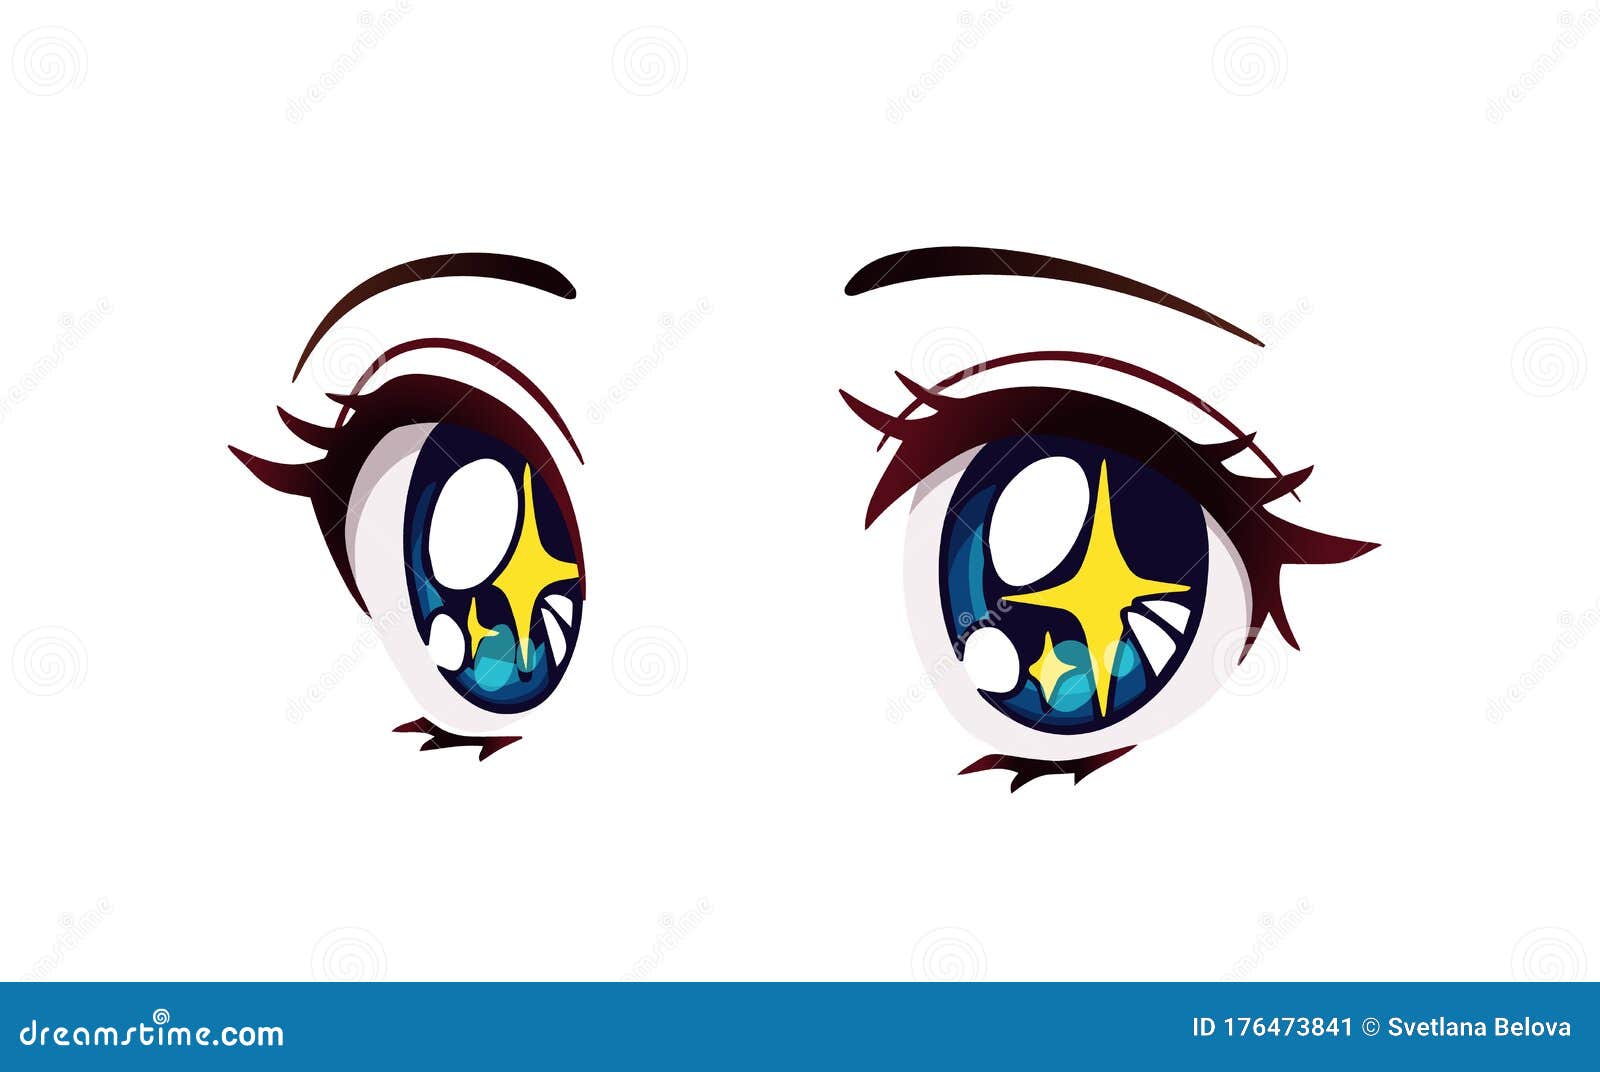 Happy Anime Style Big Blue Eyes Stock Vector Royalty Free 1650698020   Shutterstock